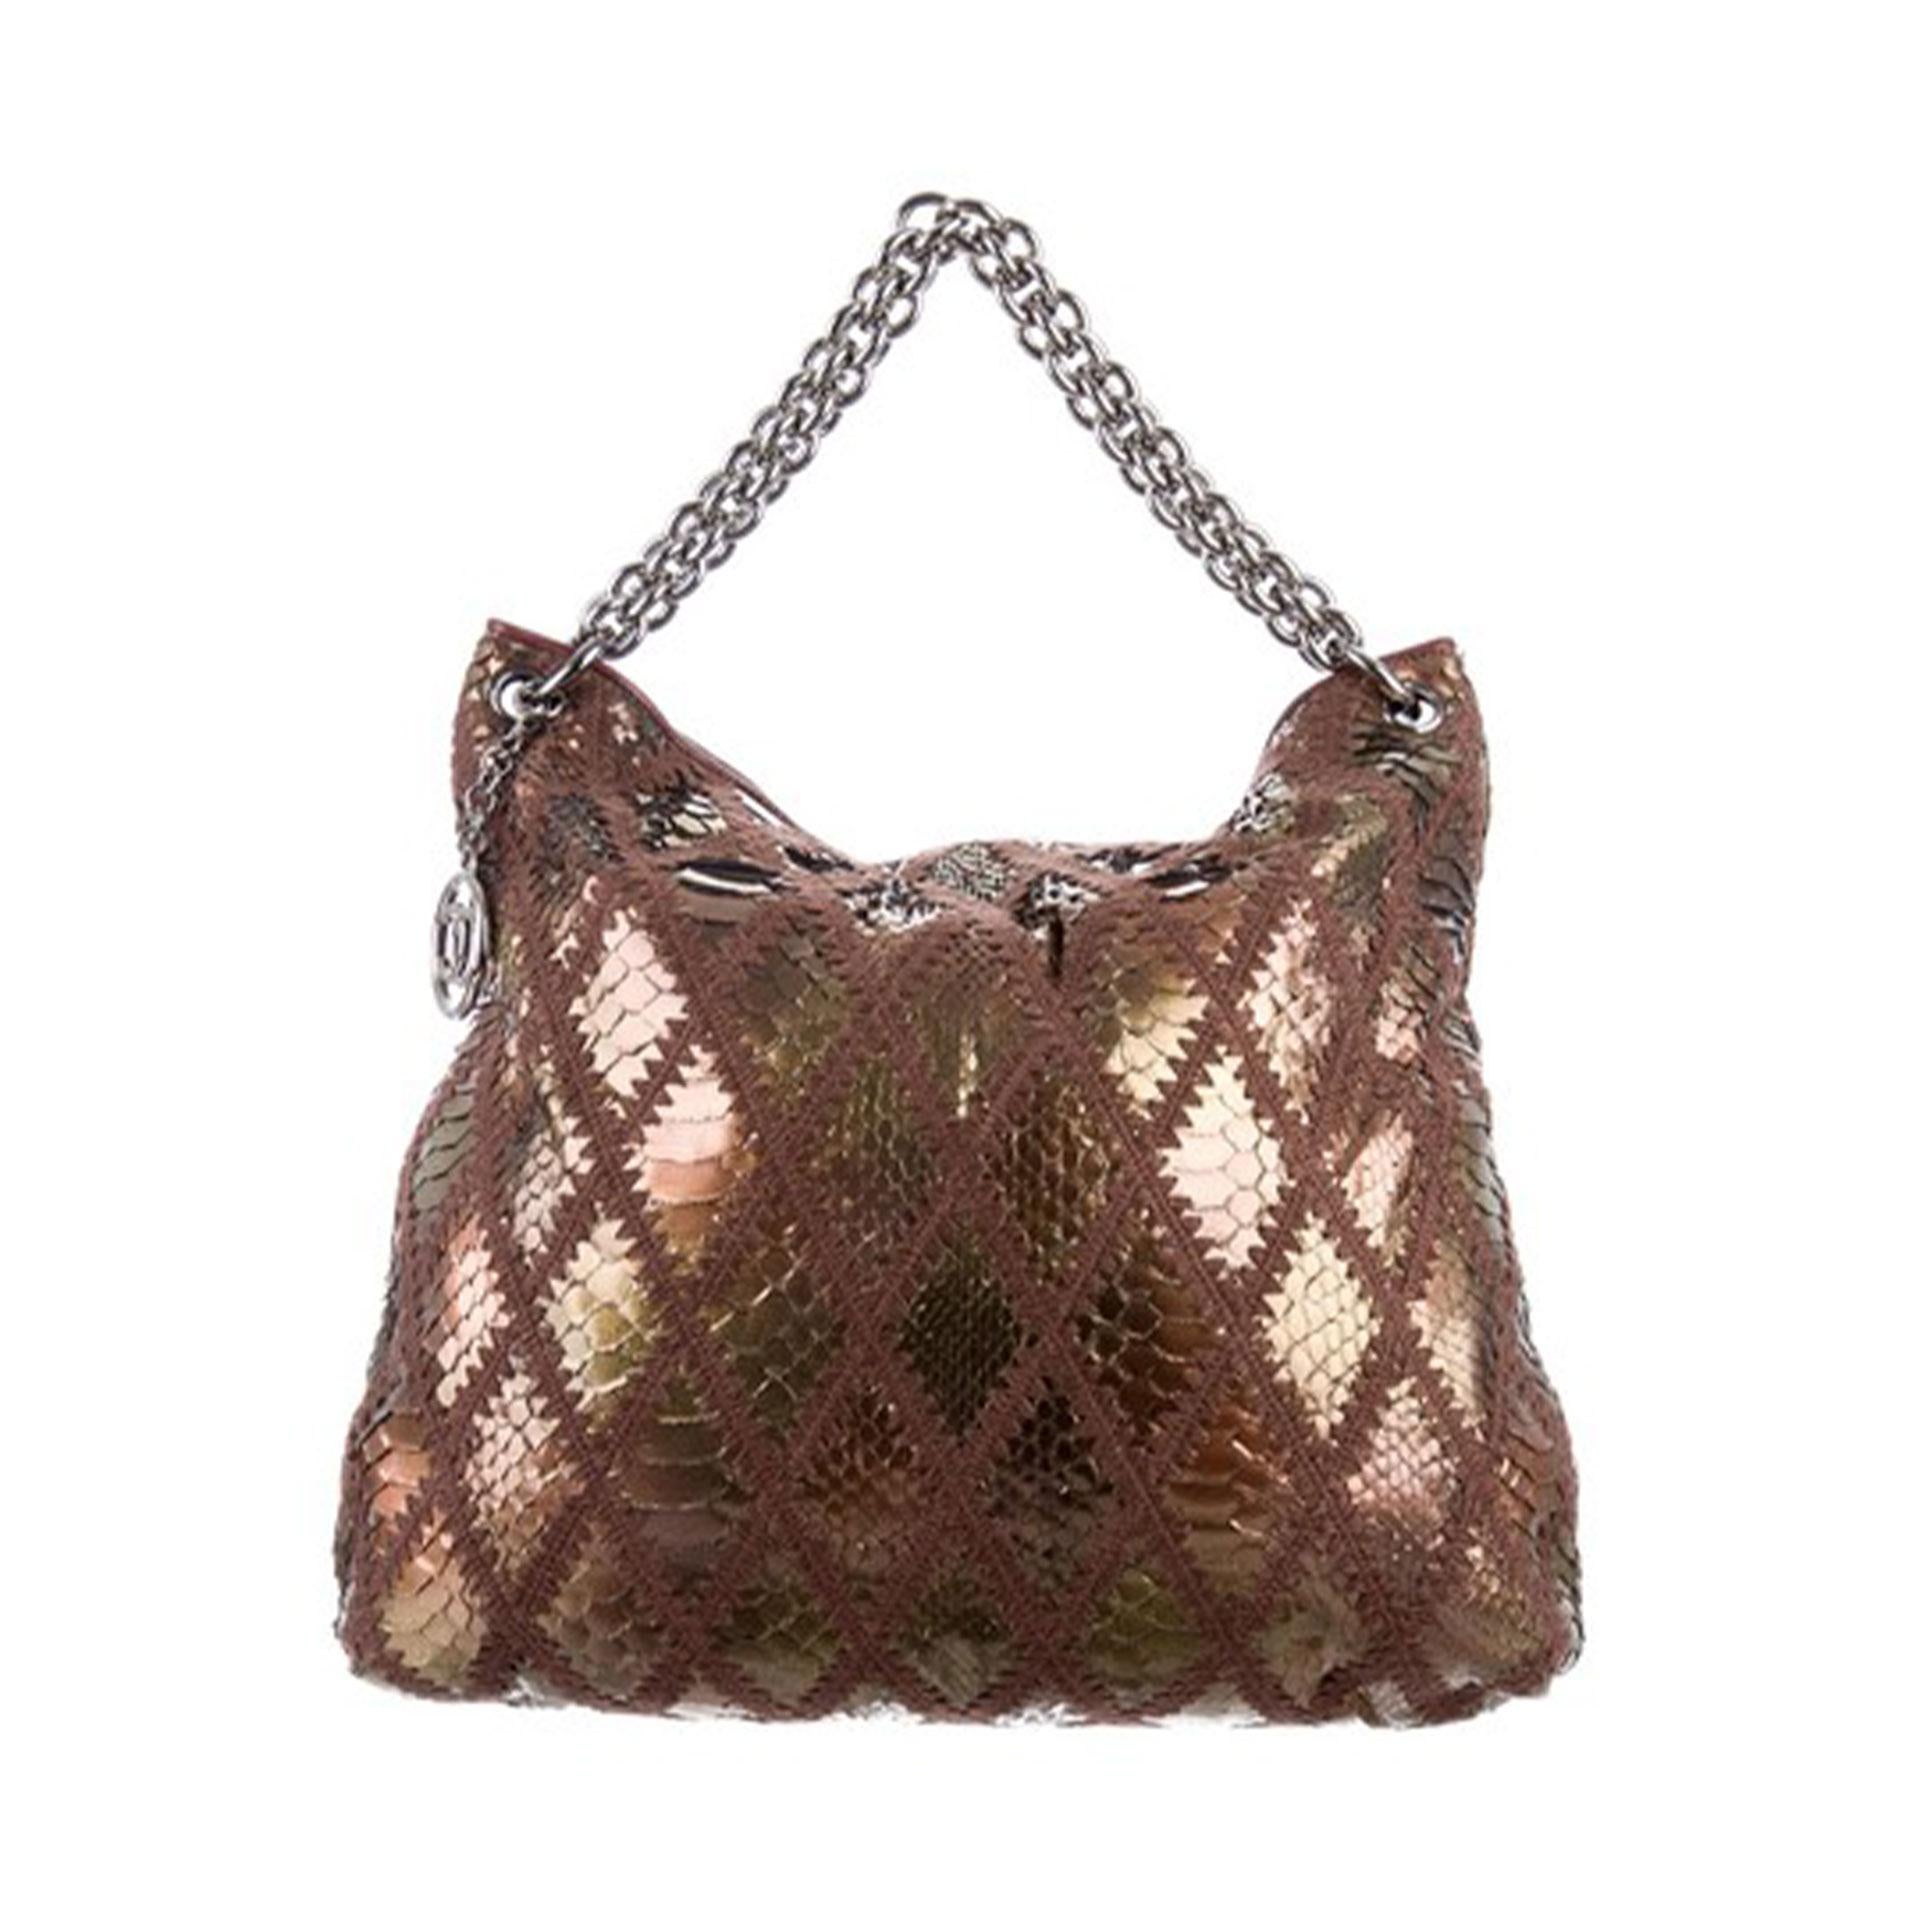 Chanel Rare Exotic Python Metallic Bronze Large 2 in 1  Tote & Clutch

2006 {VINTAGE 16 Years}

Silver hardware
Metallic bronze python 
Diamond stitch brown crochet  
Thick chain handle
Magnetic snap closure 
Lambskin leather at interior top
Satin